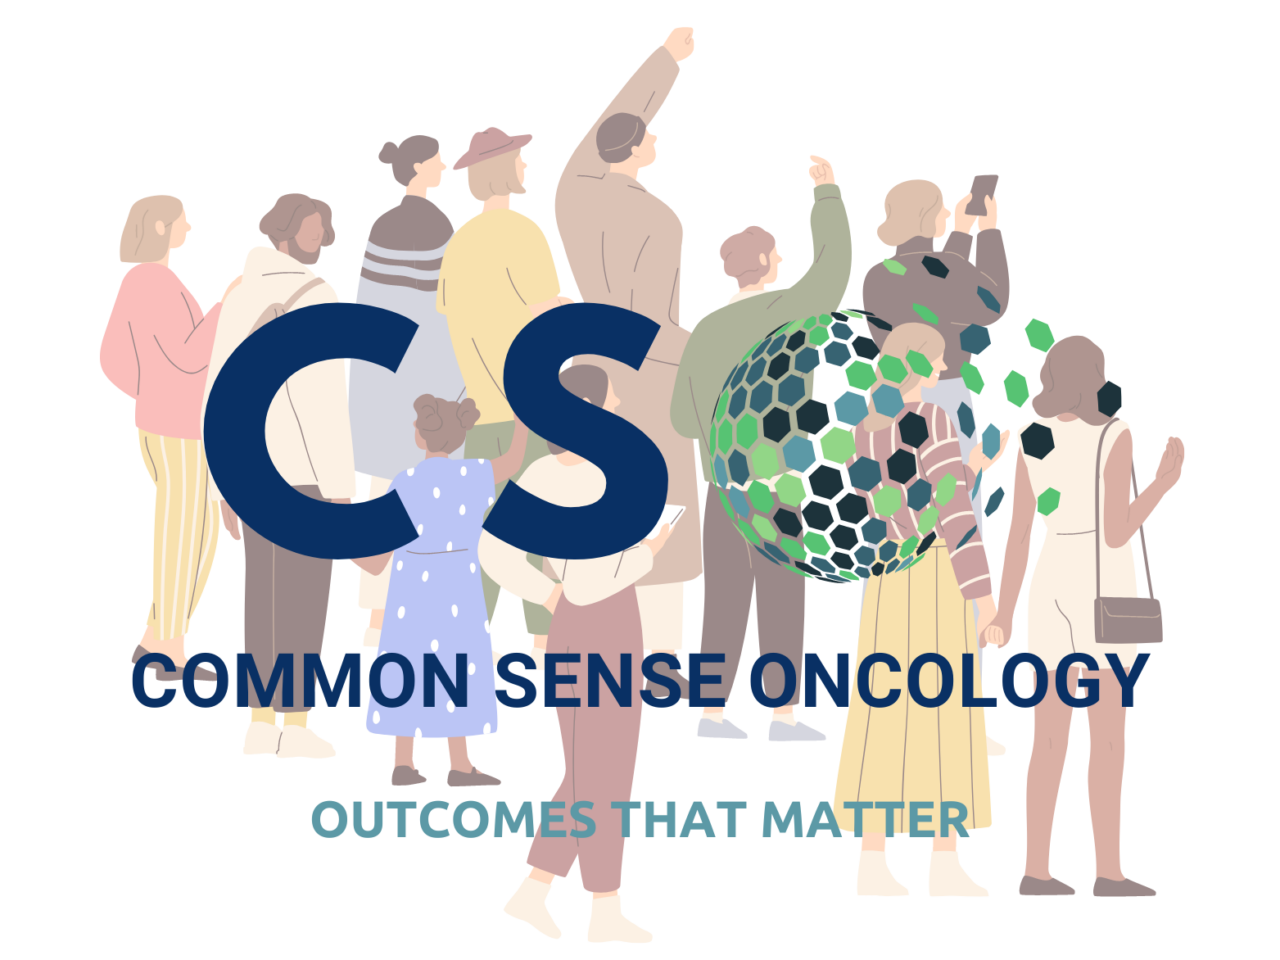 Chris Booth’s lecture on Common Sense Oncology has now been uploaded to our YouTube channel – Common Sense Oncology